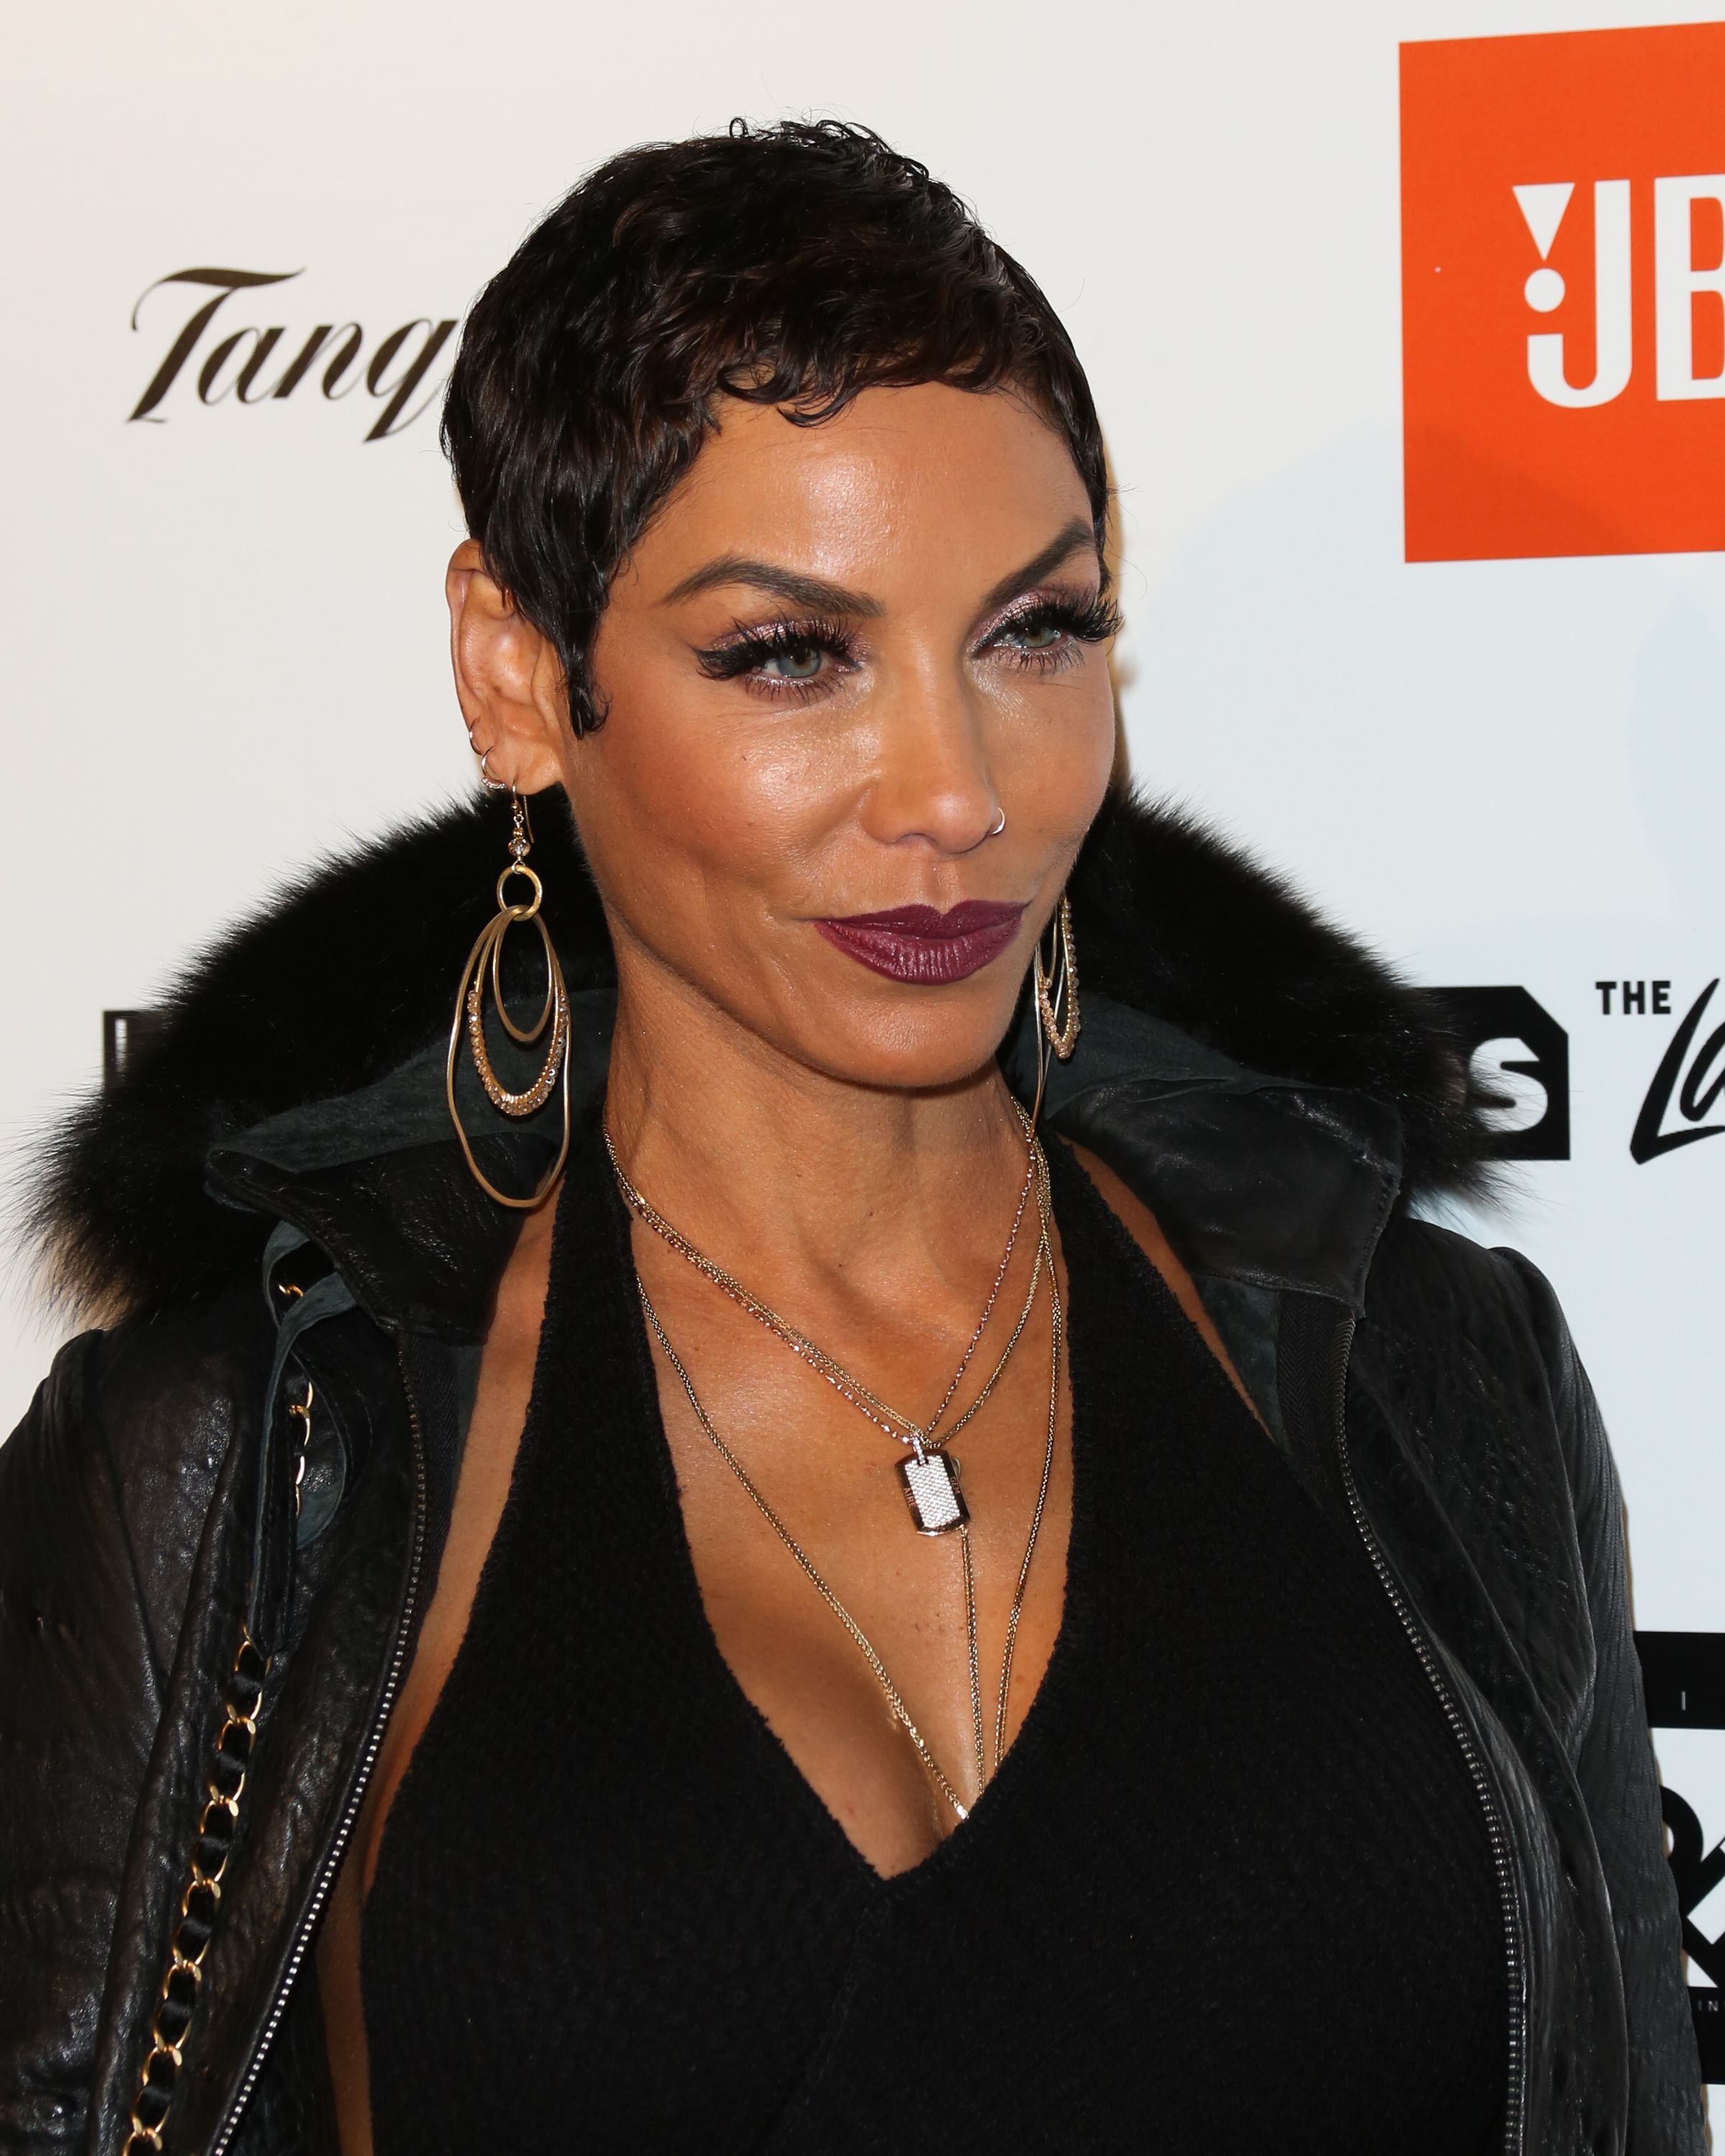 Nicole Murphy at Kenny 'The Jet' Smith's annual All-Star bash in California on February 16, 2018. | Photo: Getty Images